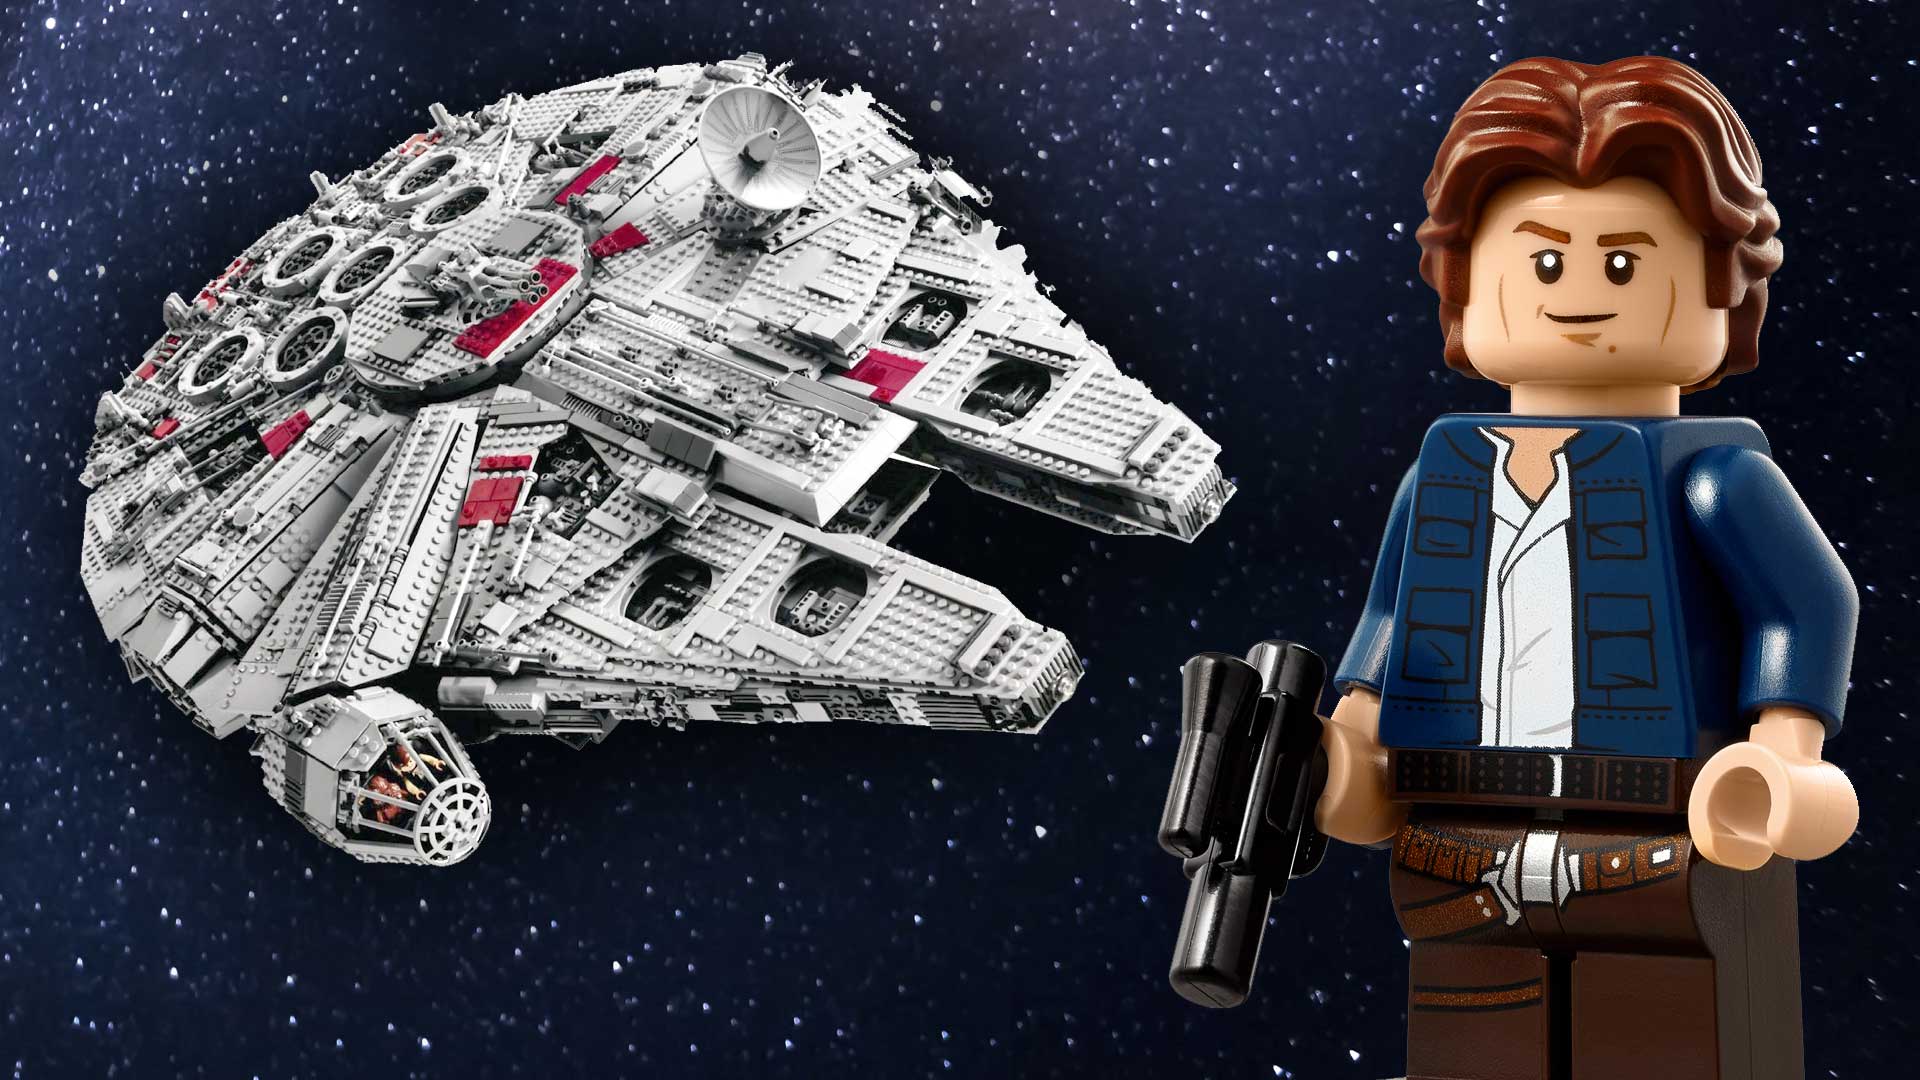 Do you have what it takes to build the Star Wars LEGO Millennium Falcon?